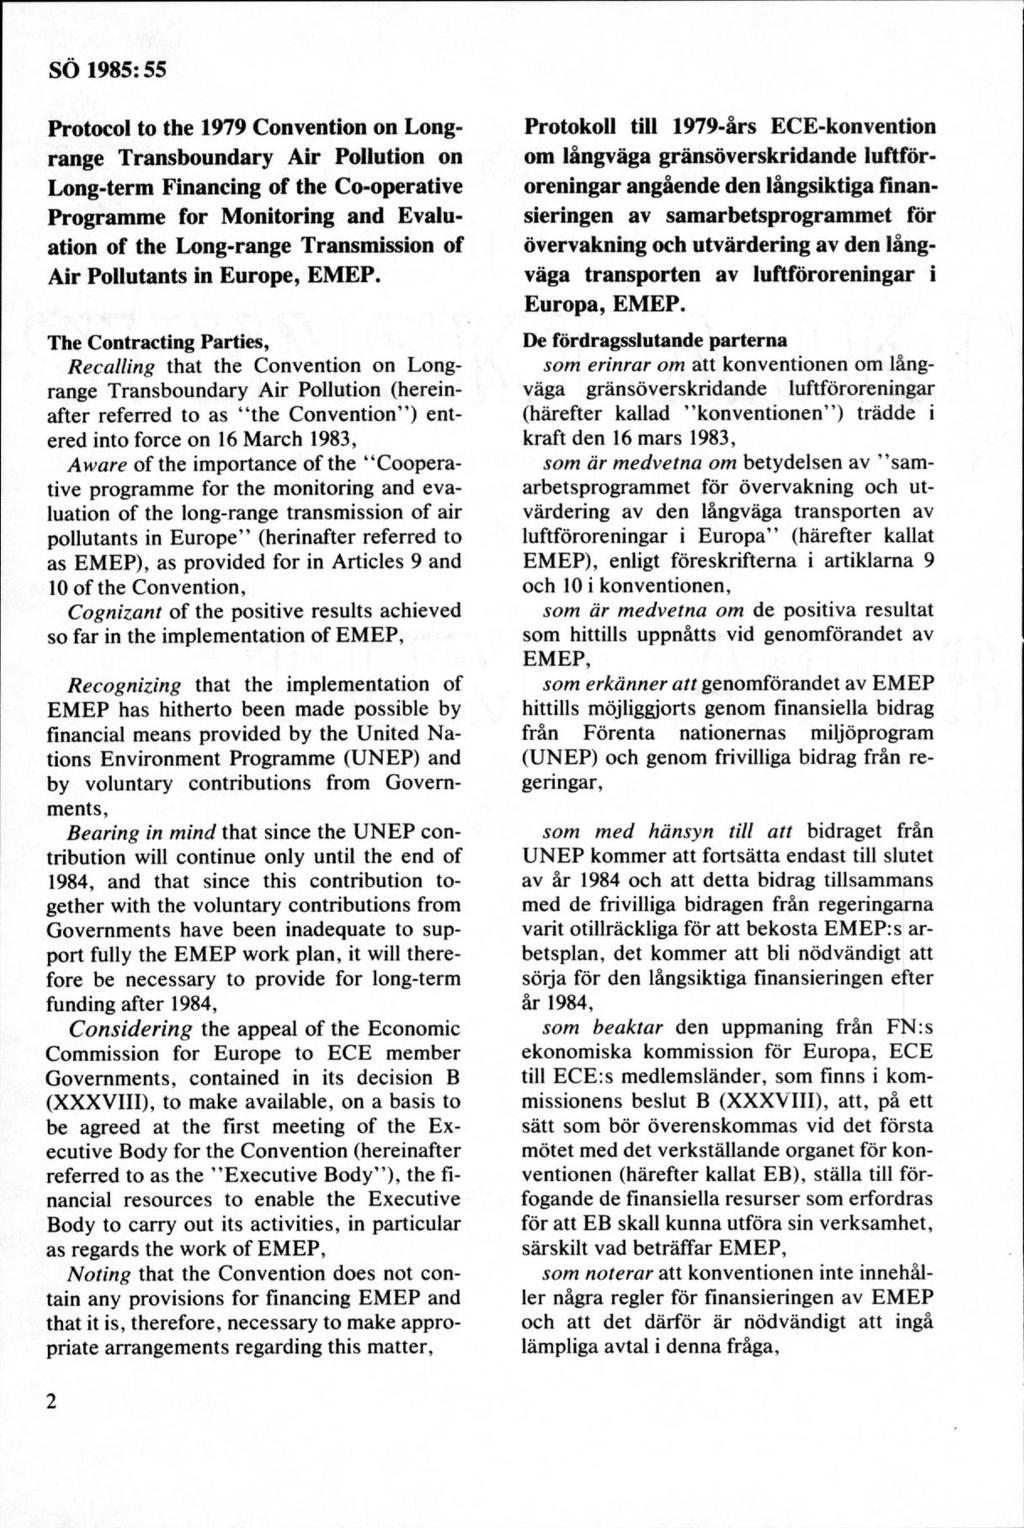 Protocol to the 1979 Convention on Longrange Transboundary Air Pollution on Long-term Financing of the Co-operative Programme for Monitoring and Evaluation of the Long-range Transmission of Air